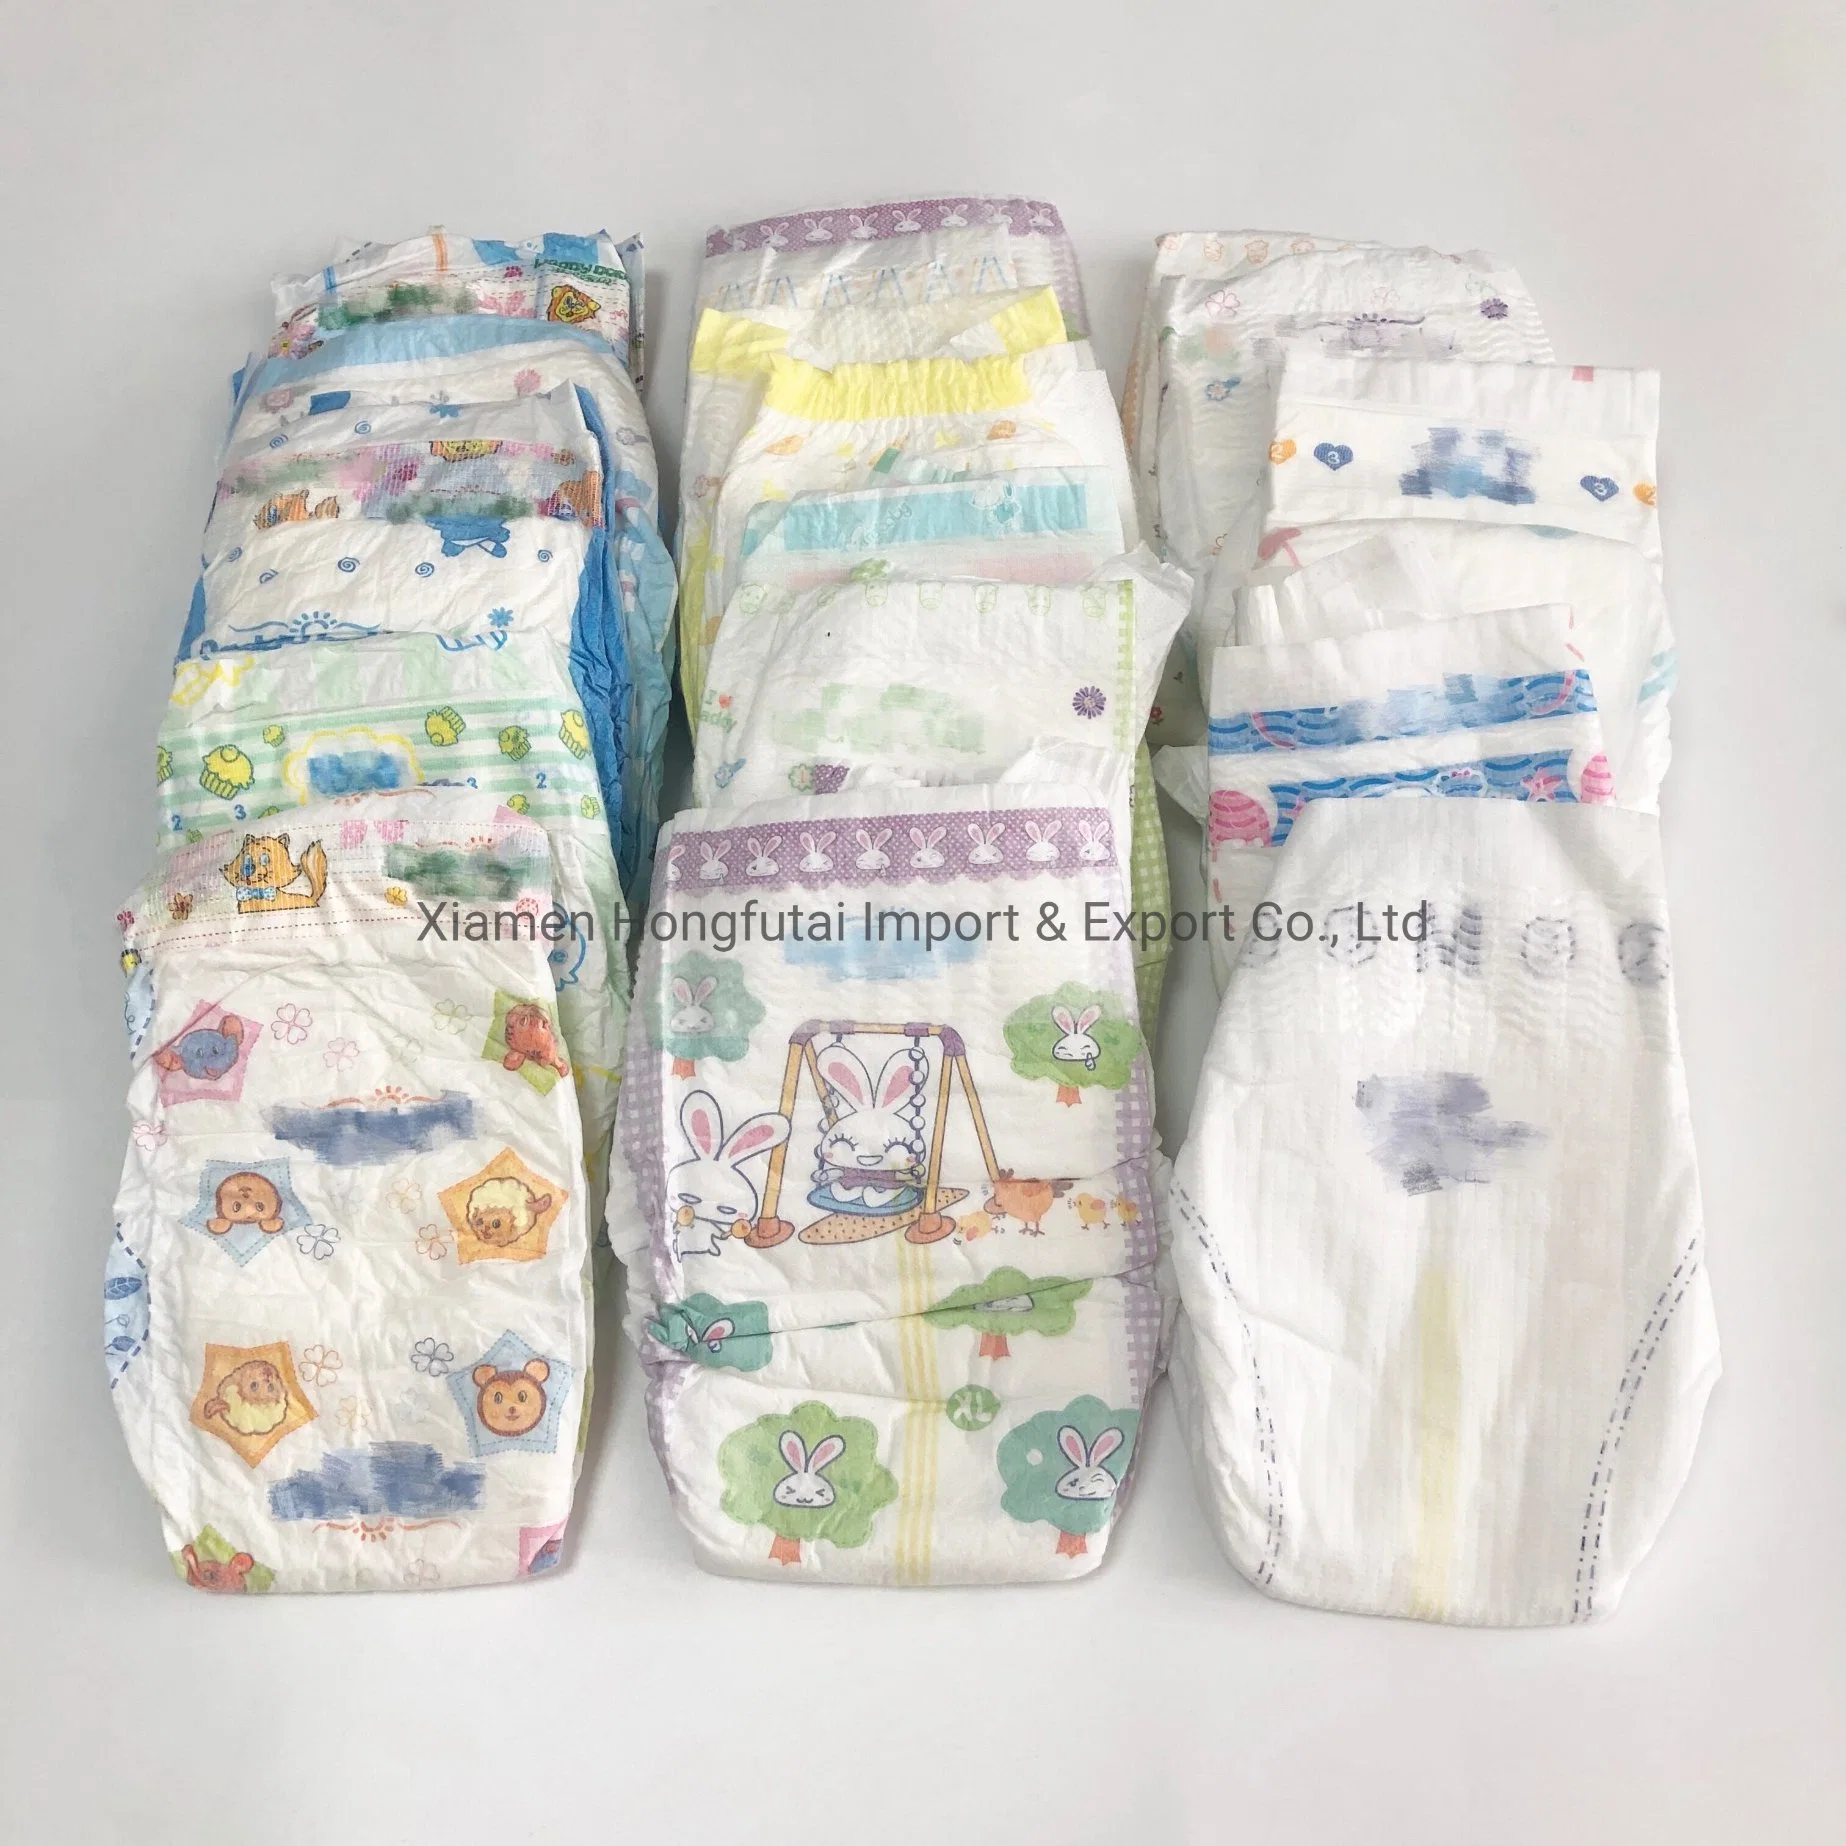 2023 Hot Selling Wholesale/Supplier Premium Quality Ultra Soft High Absorption Cheap Price Breathable Care Baby Comfortable Diaper Nappy Items Made in China